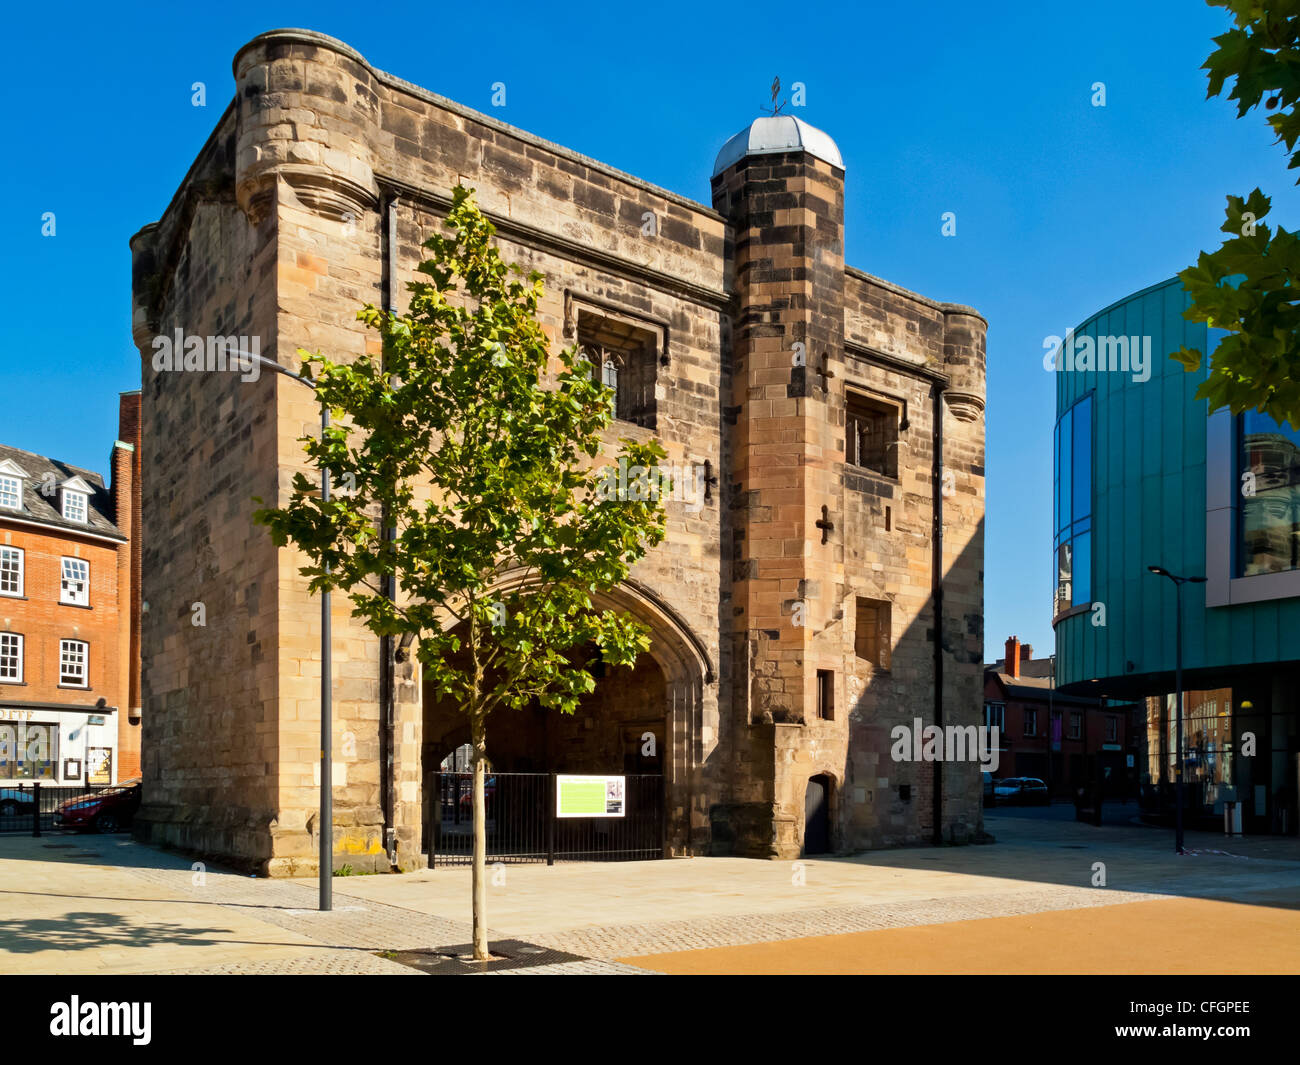 The Magazine Gateway in Leicester city centre built circa 1410 as a medieval gate into the Newark and Leicester Castle Stock Photo